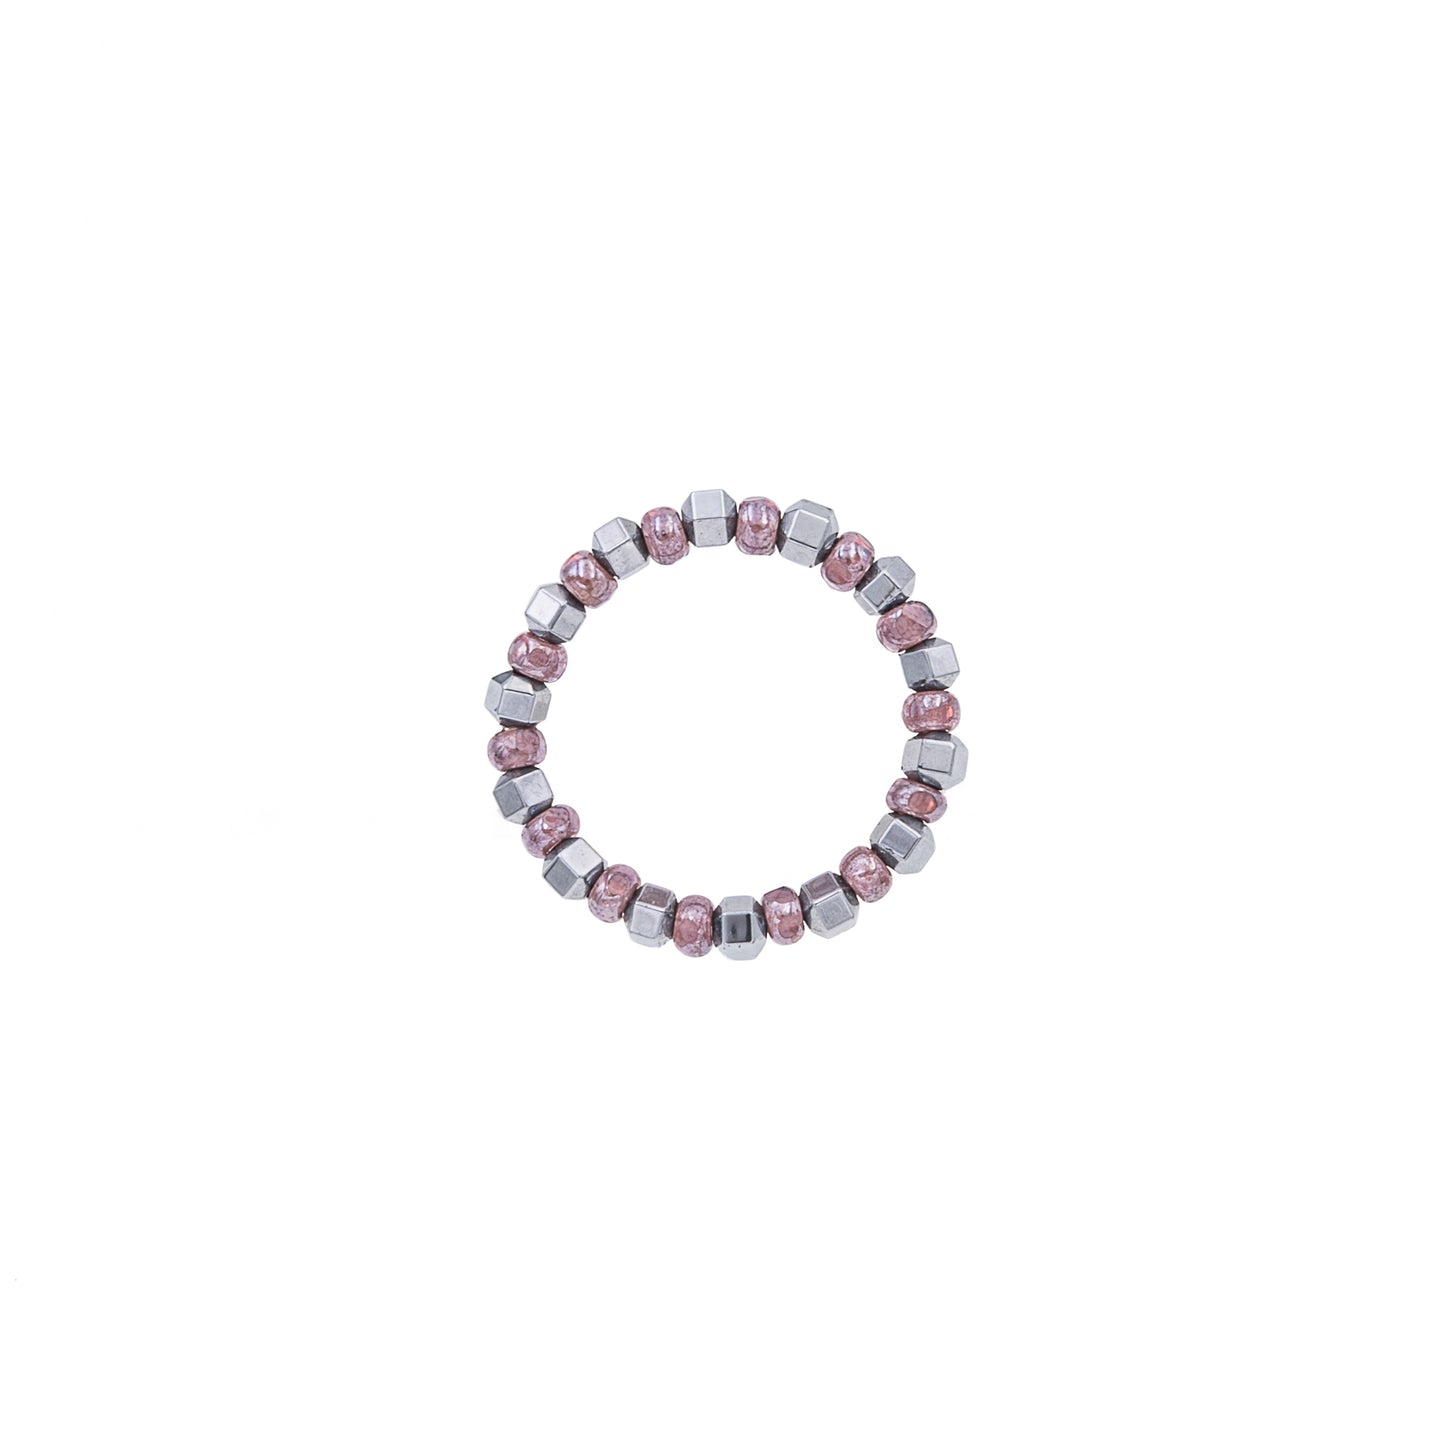 Zurina Ketola Beaded Ring. Stretch Ring with Purple Seed Beads and Silver Plated Hematite.